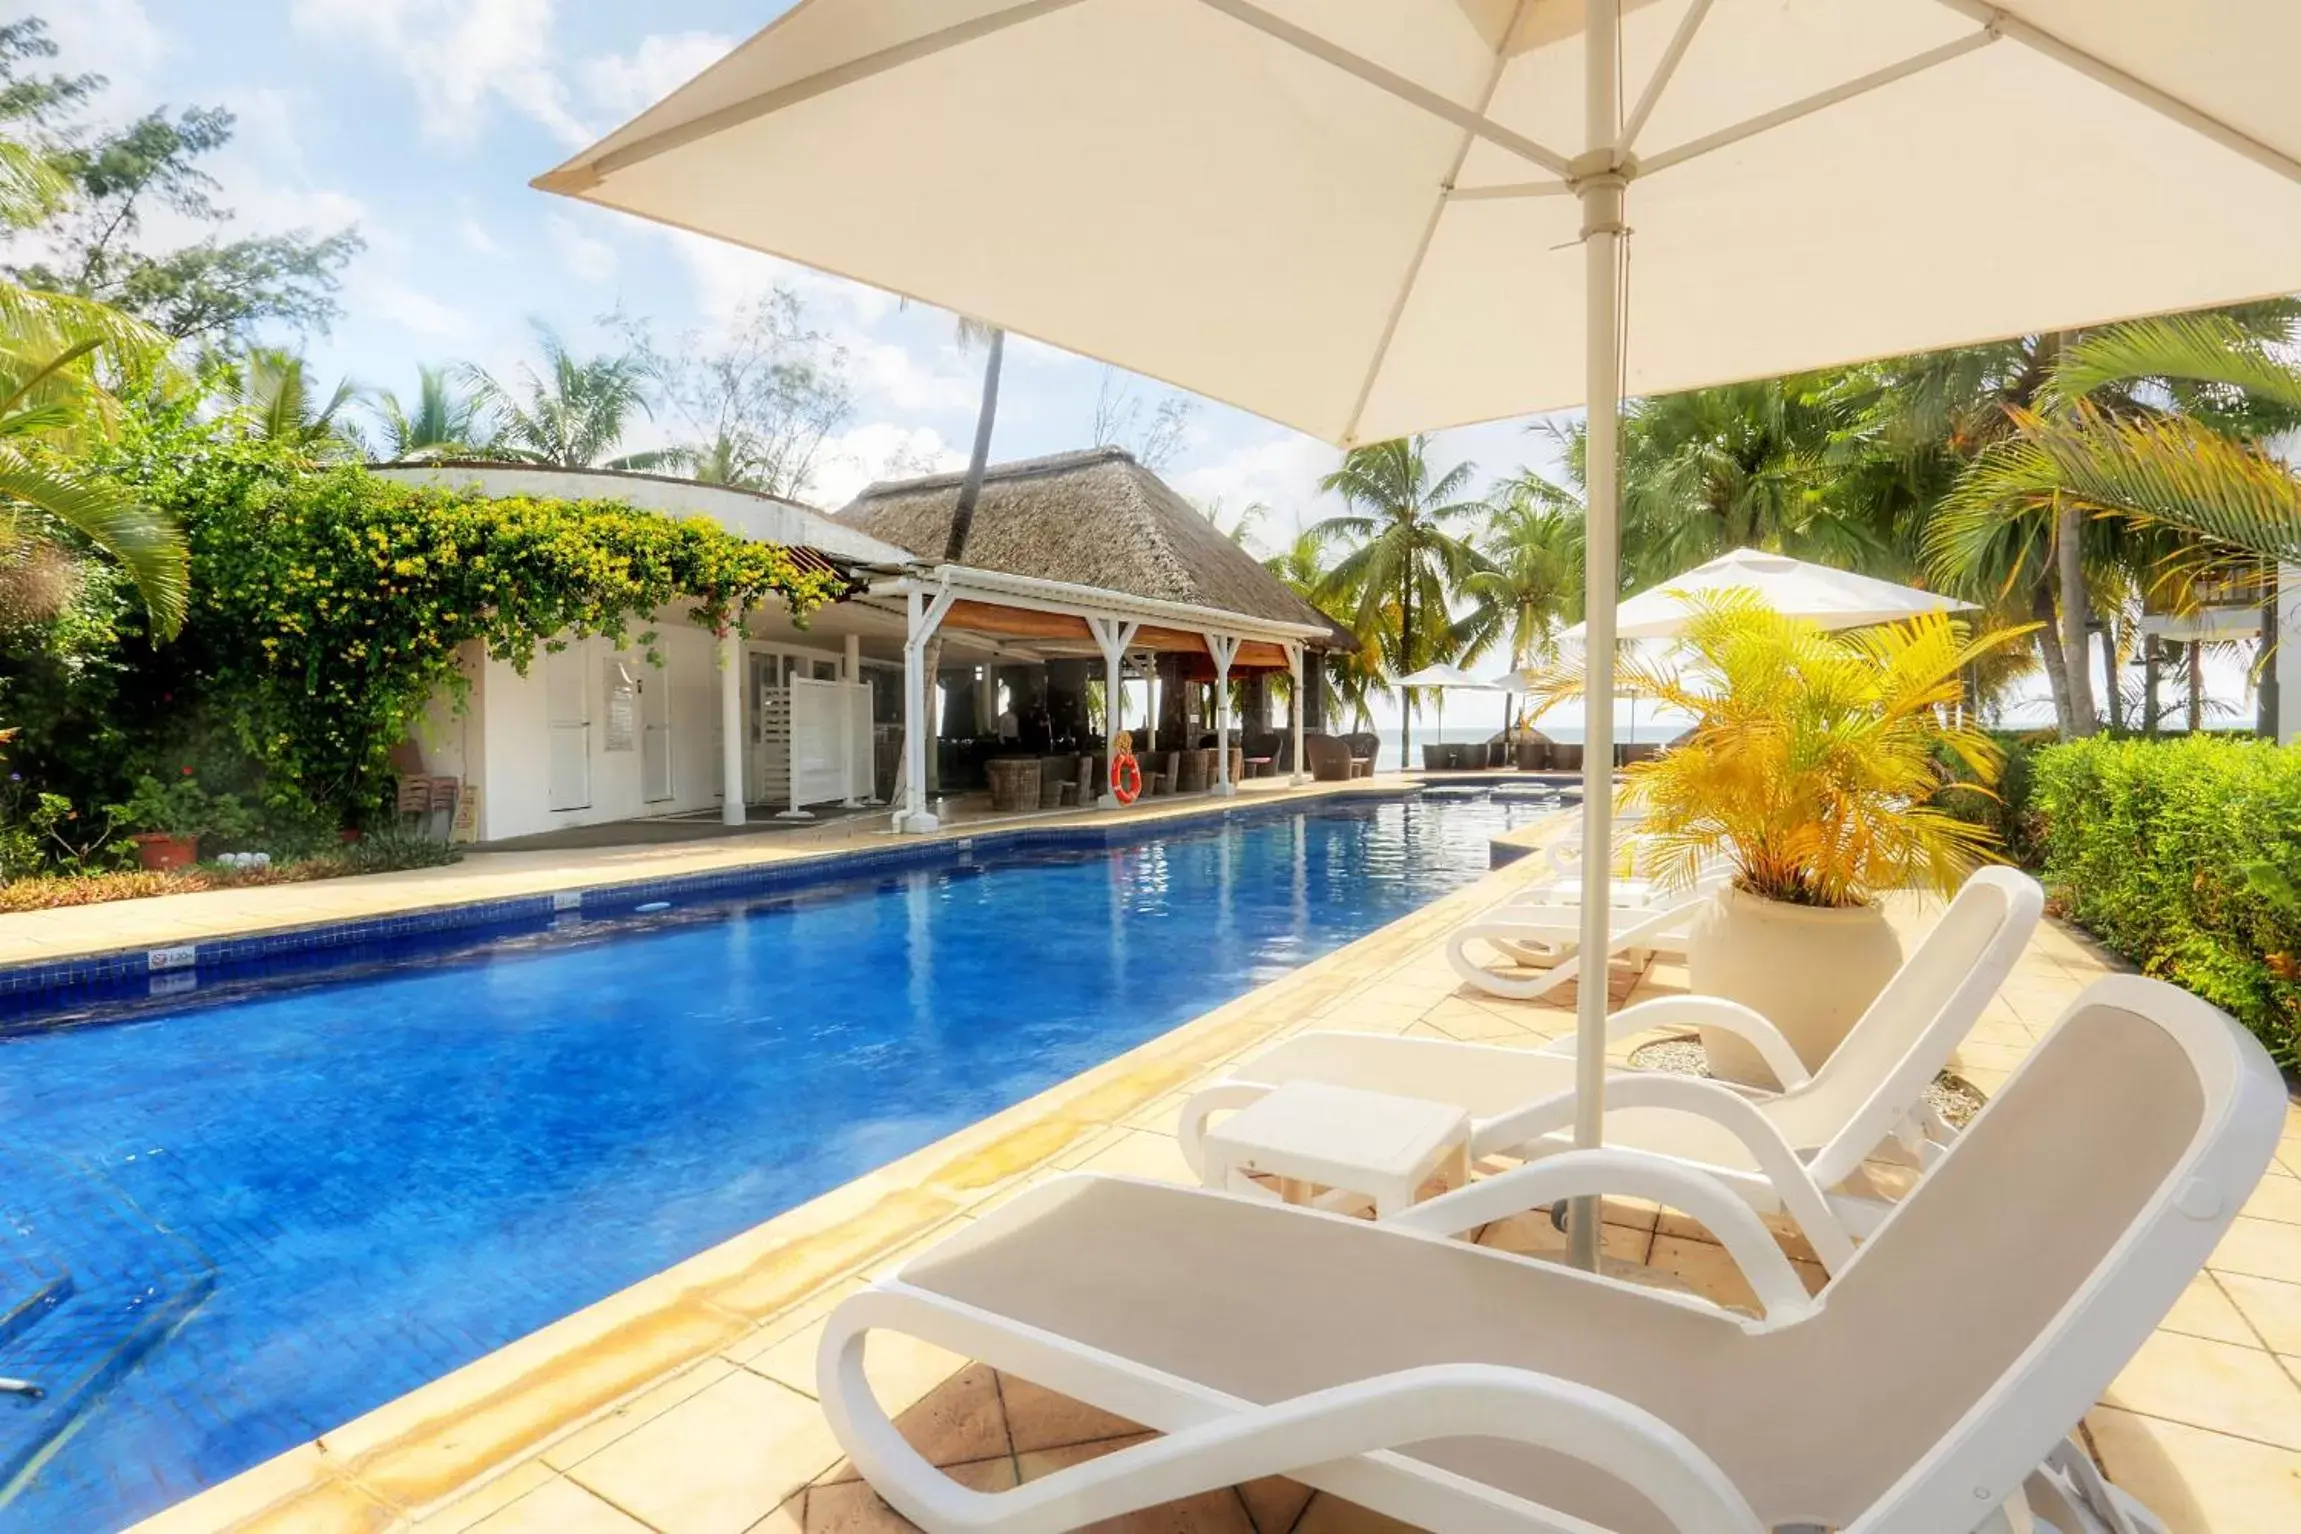 Swimming Pool in Cocotiers Hotel – Mauritius